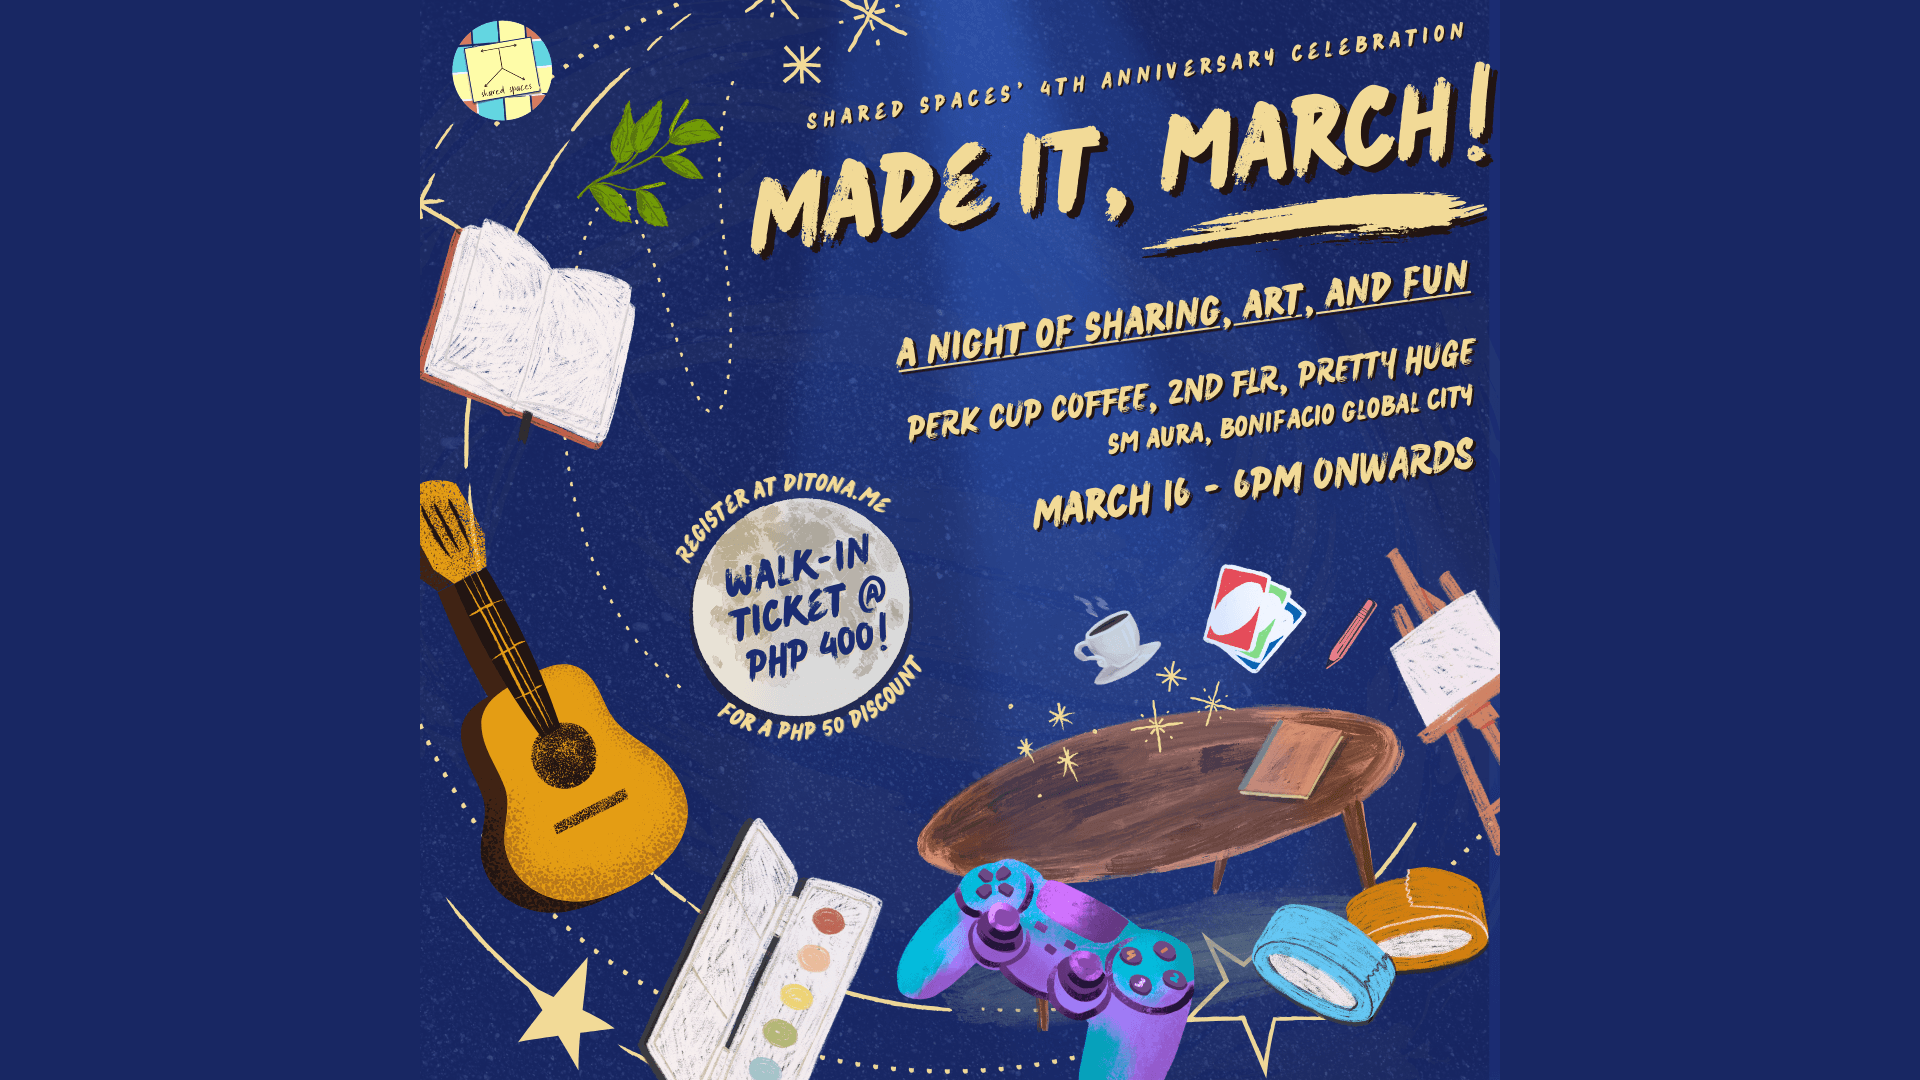 Made it, March! - Shared Spaces' 4th Anniversary Poster